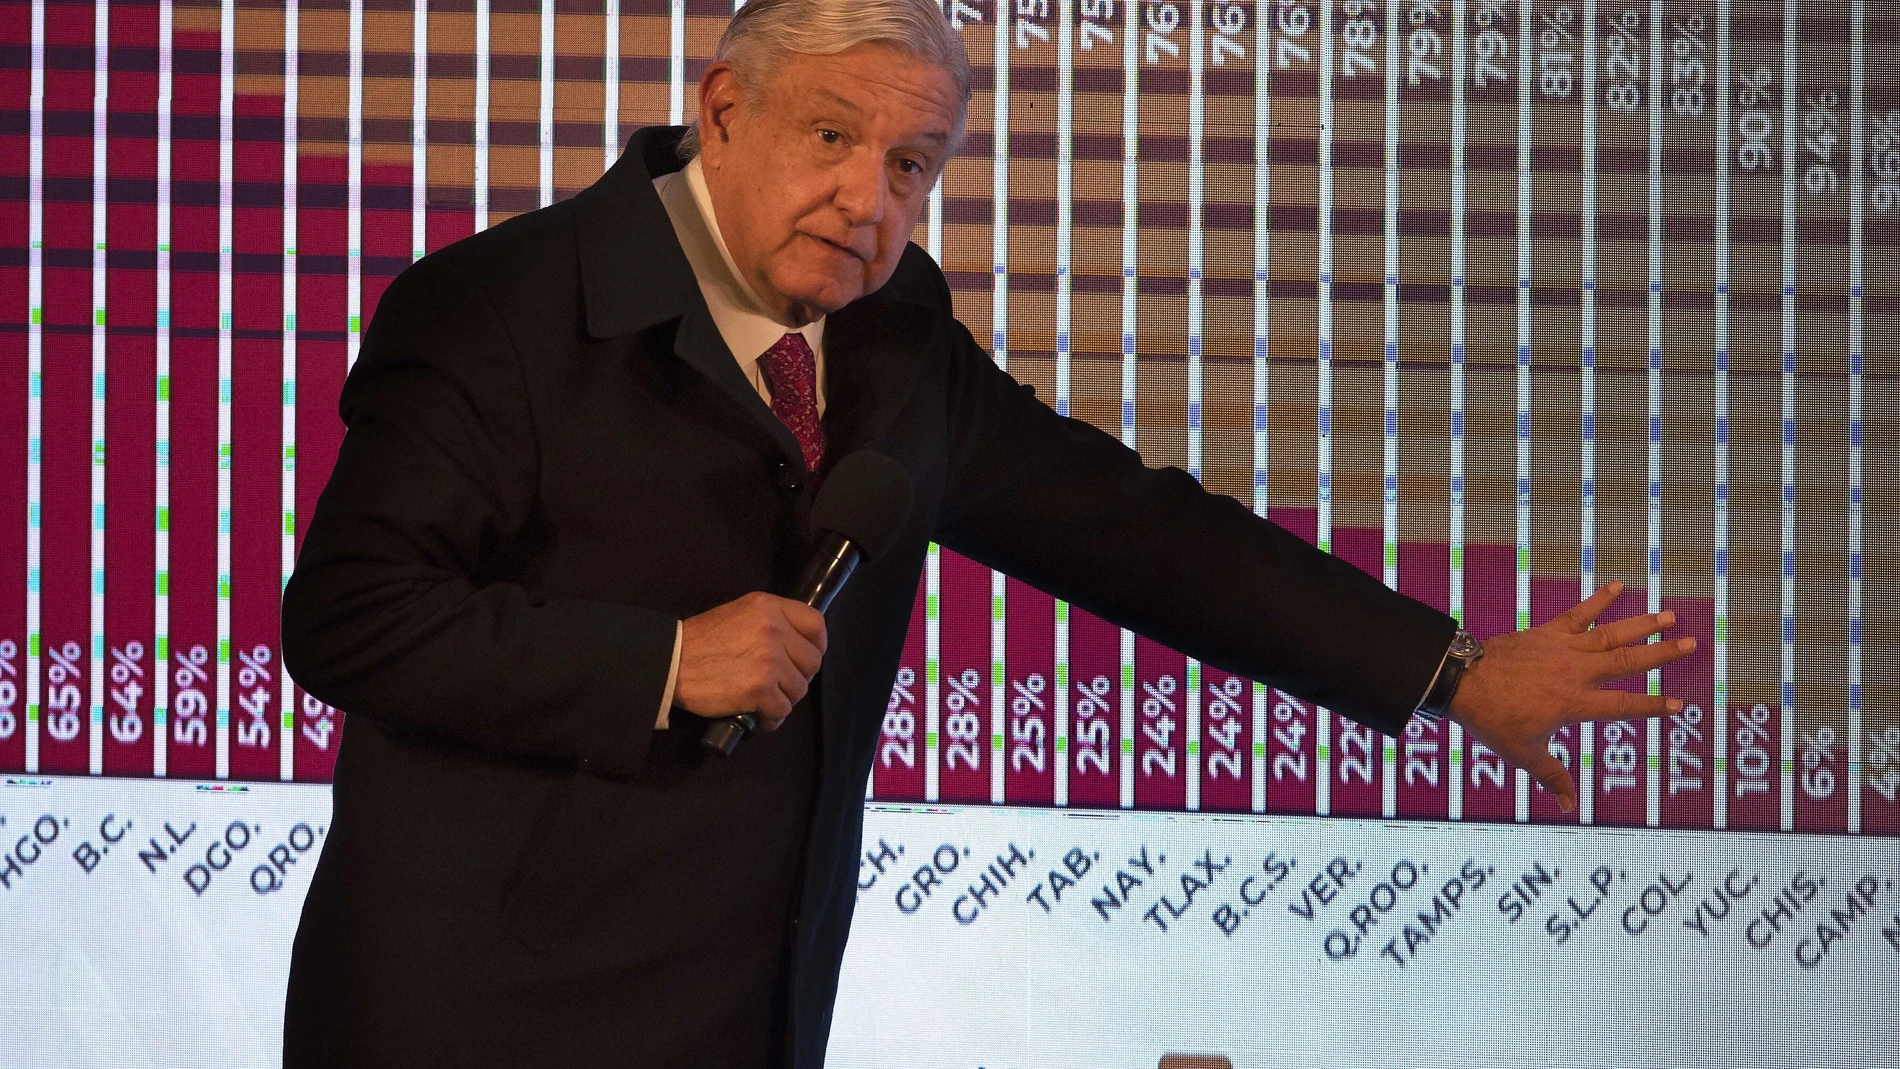 FILE - In this Dec. 18, 2020 file photo, Mexican President Andres Manuel Lopez Obrador points to a graph showing the percentages of hospital beds available, state by state, during his daily news conference at the presidential palace, Palacio Nacional, in Mexico City. LÃ³pez Obrador was working from isolation on Monday, Jan. 25, 2021, a day after announcing that he had tested positive for COVID-19, his interior secretary said. (AP Photo/Marco Ugarte, File)